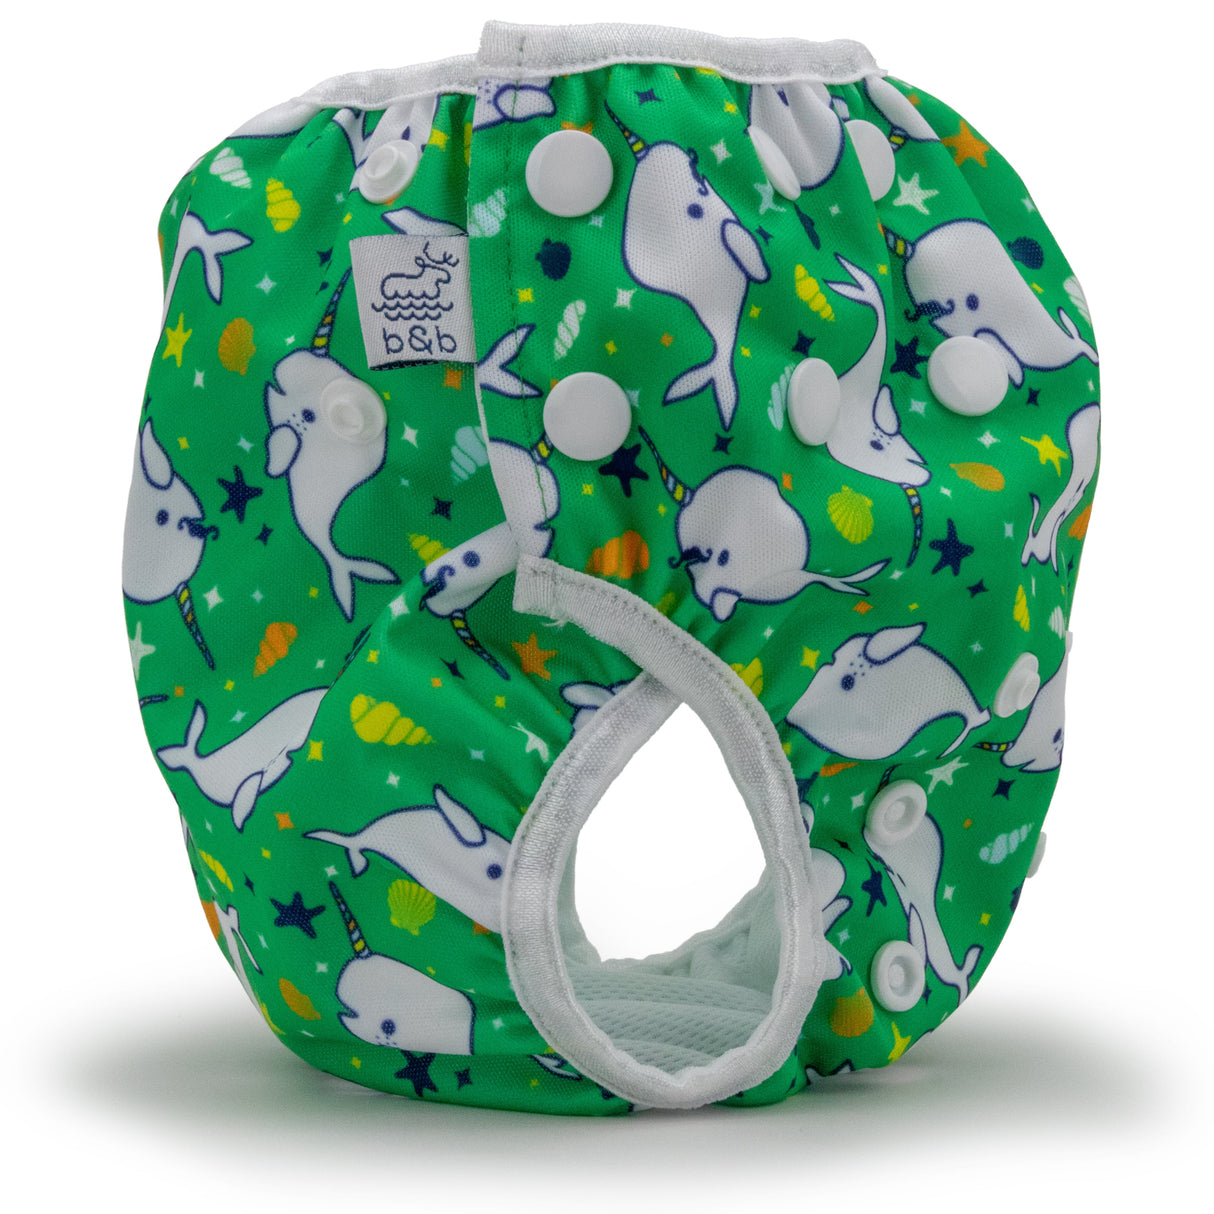 Narwhals 0-3 years Nageuret  Swim Diaper (Green) by Beau & Belle Littles